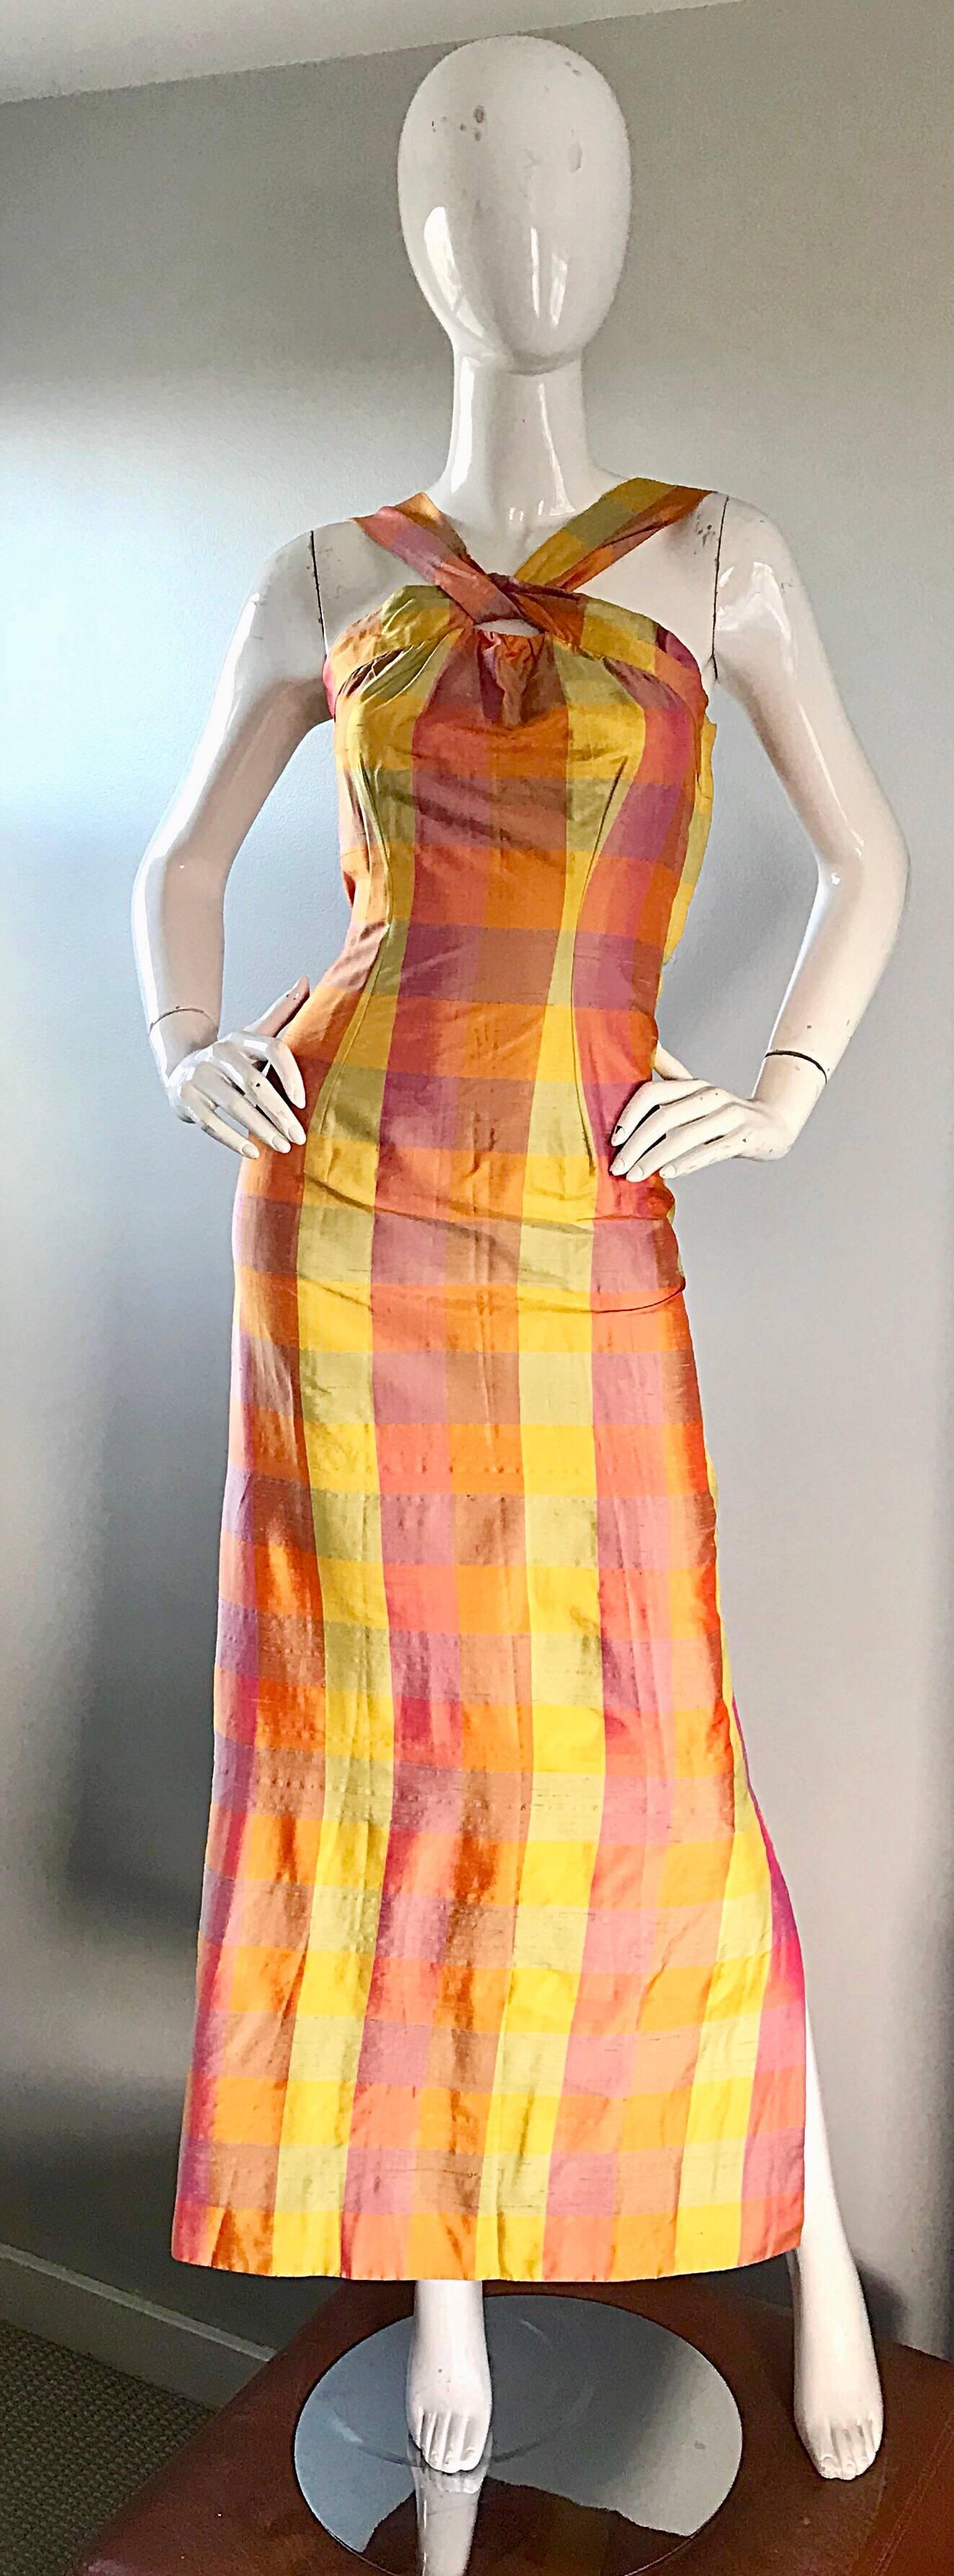 Gorgeous 1970s plaid silk shantung halter maxi dress! Pastel colors of yellow, orange and pink throughout. Keyhole (Peek-a-boo) above the bust. The perfect fitting dress, with an amazing print! Hidden metal zipper up the side with hook-and-eye